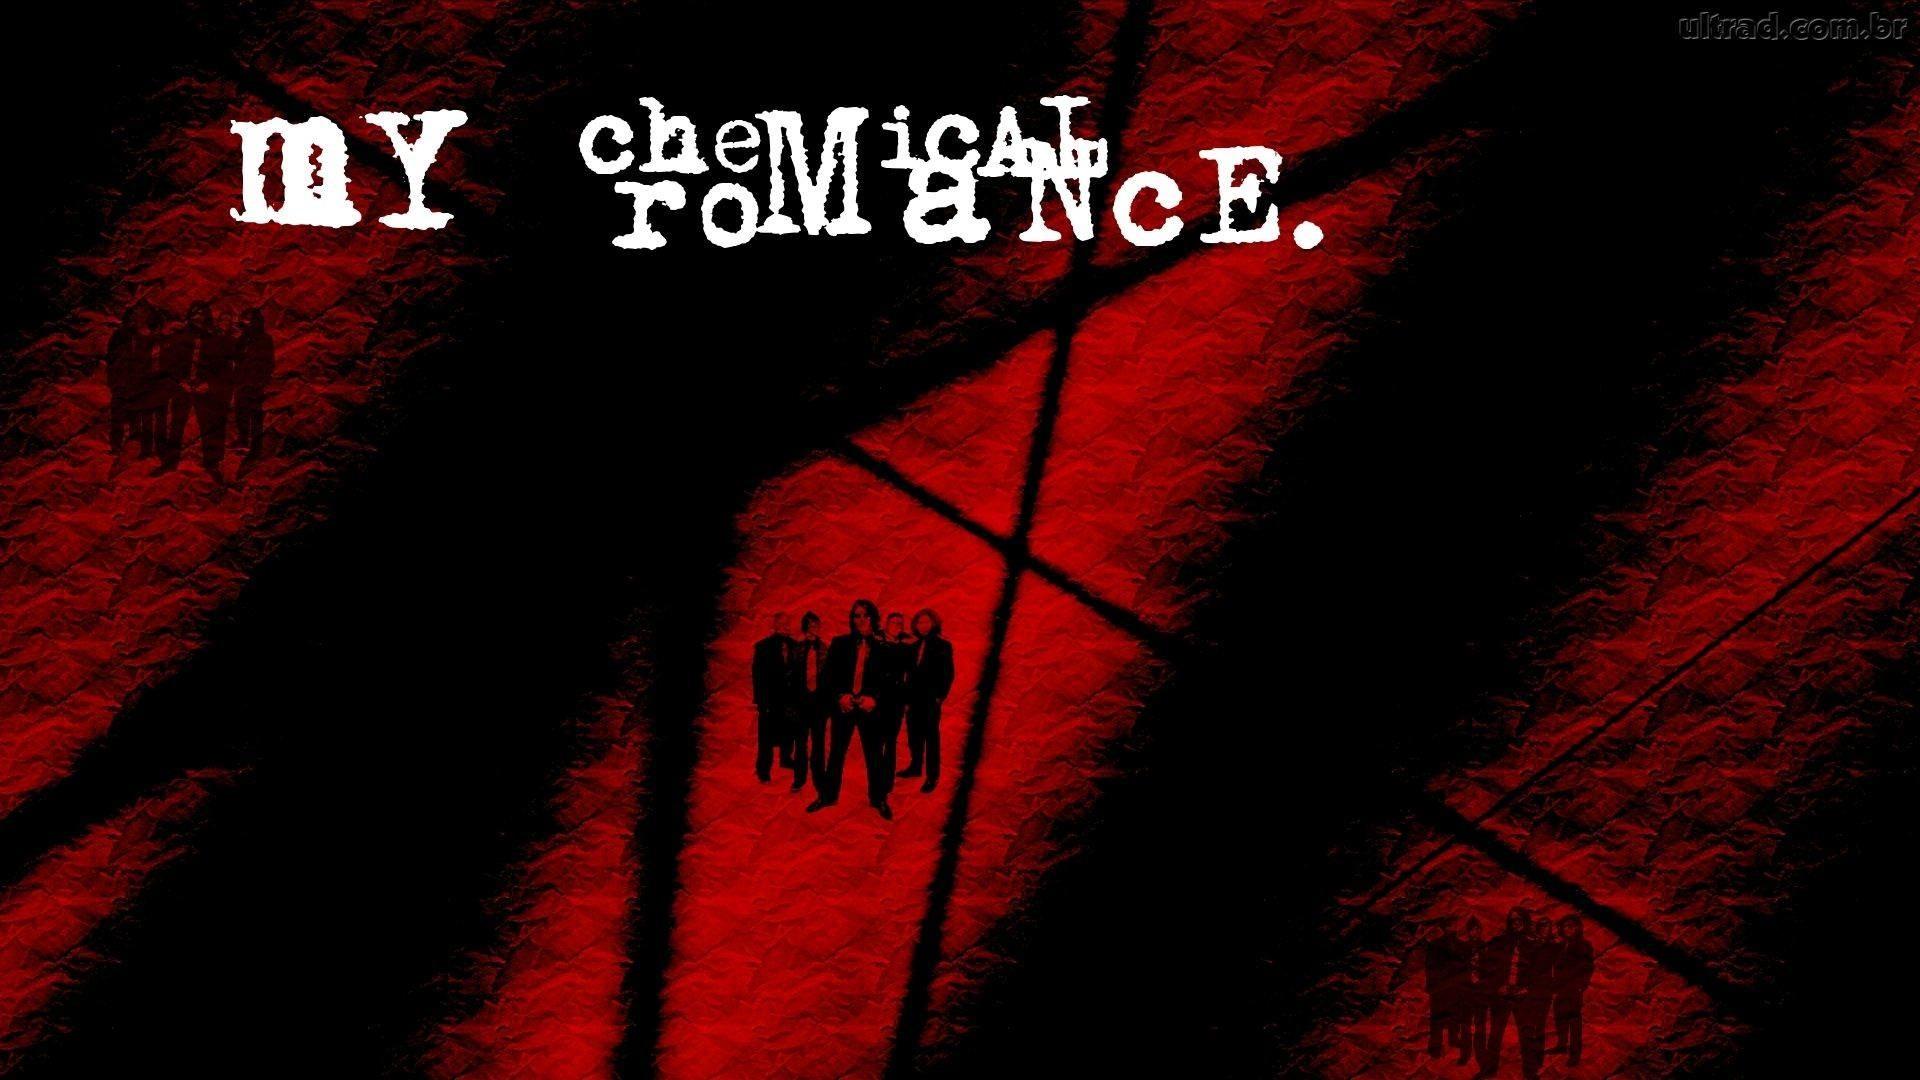 My Chemical Romance Aesthetic Wallpapers - Top Free My Chemical Romance ...